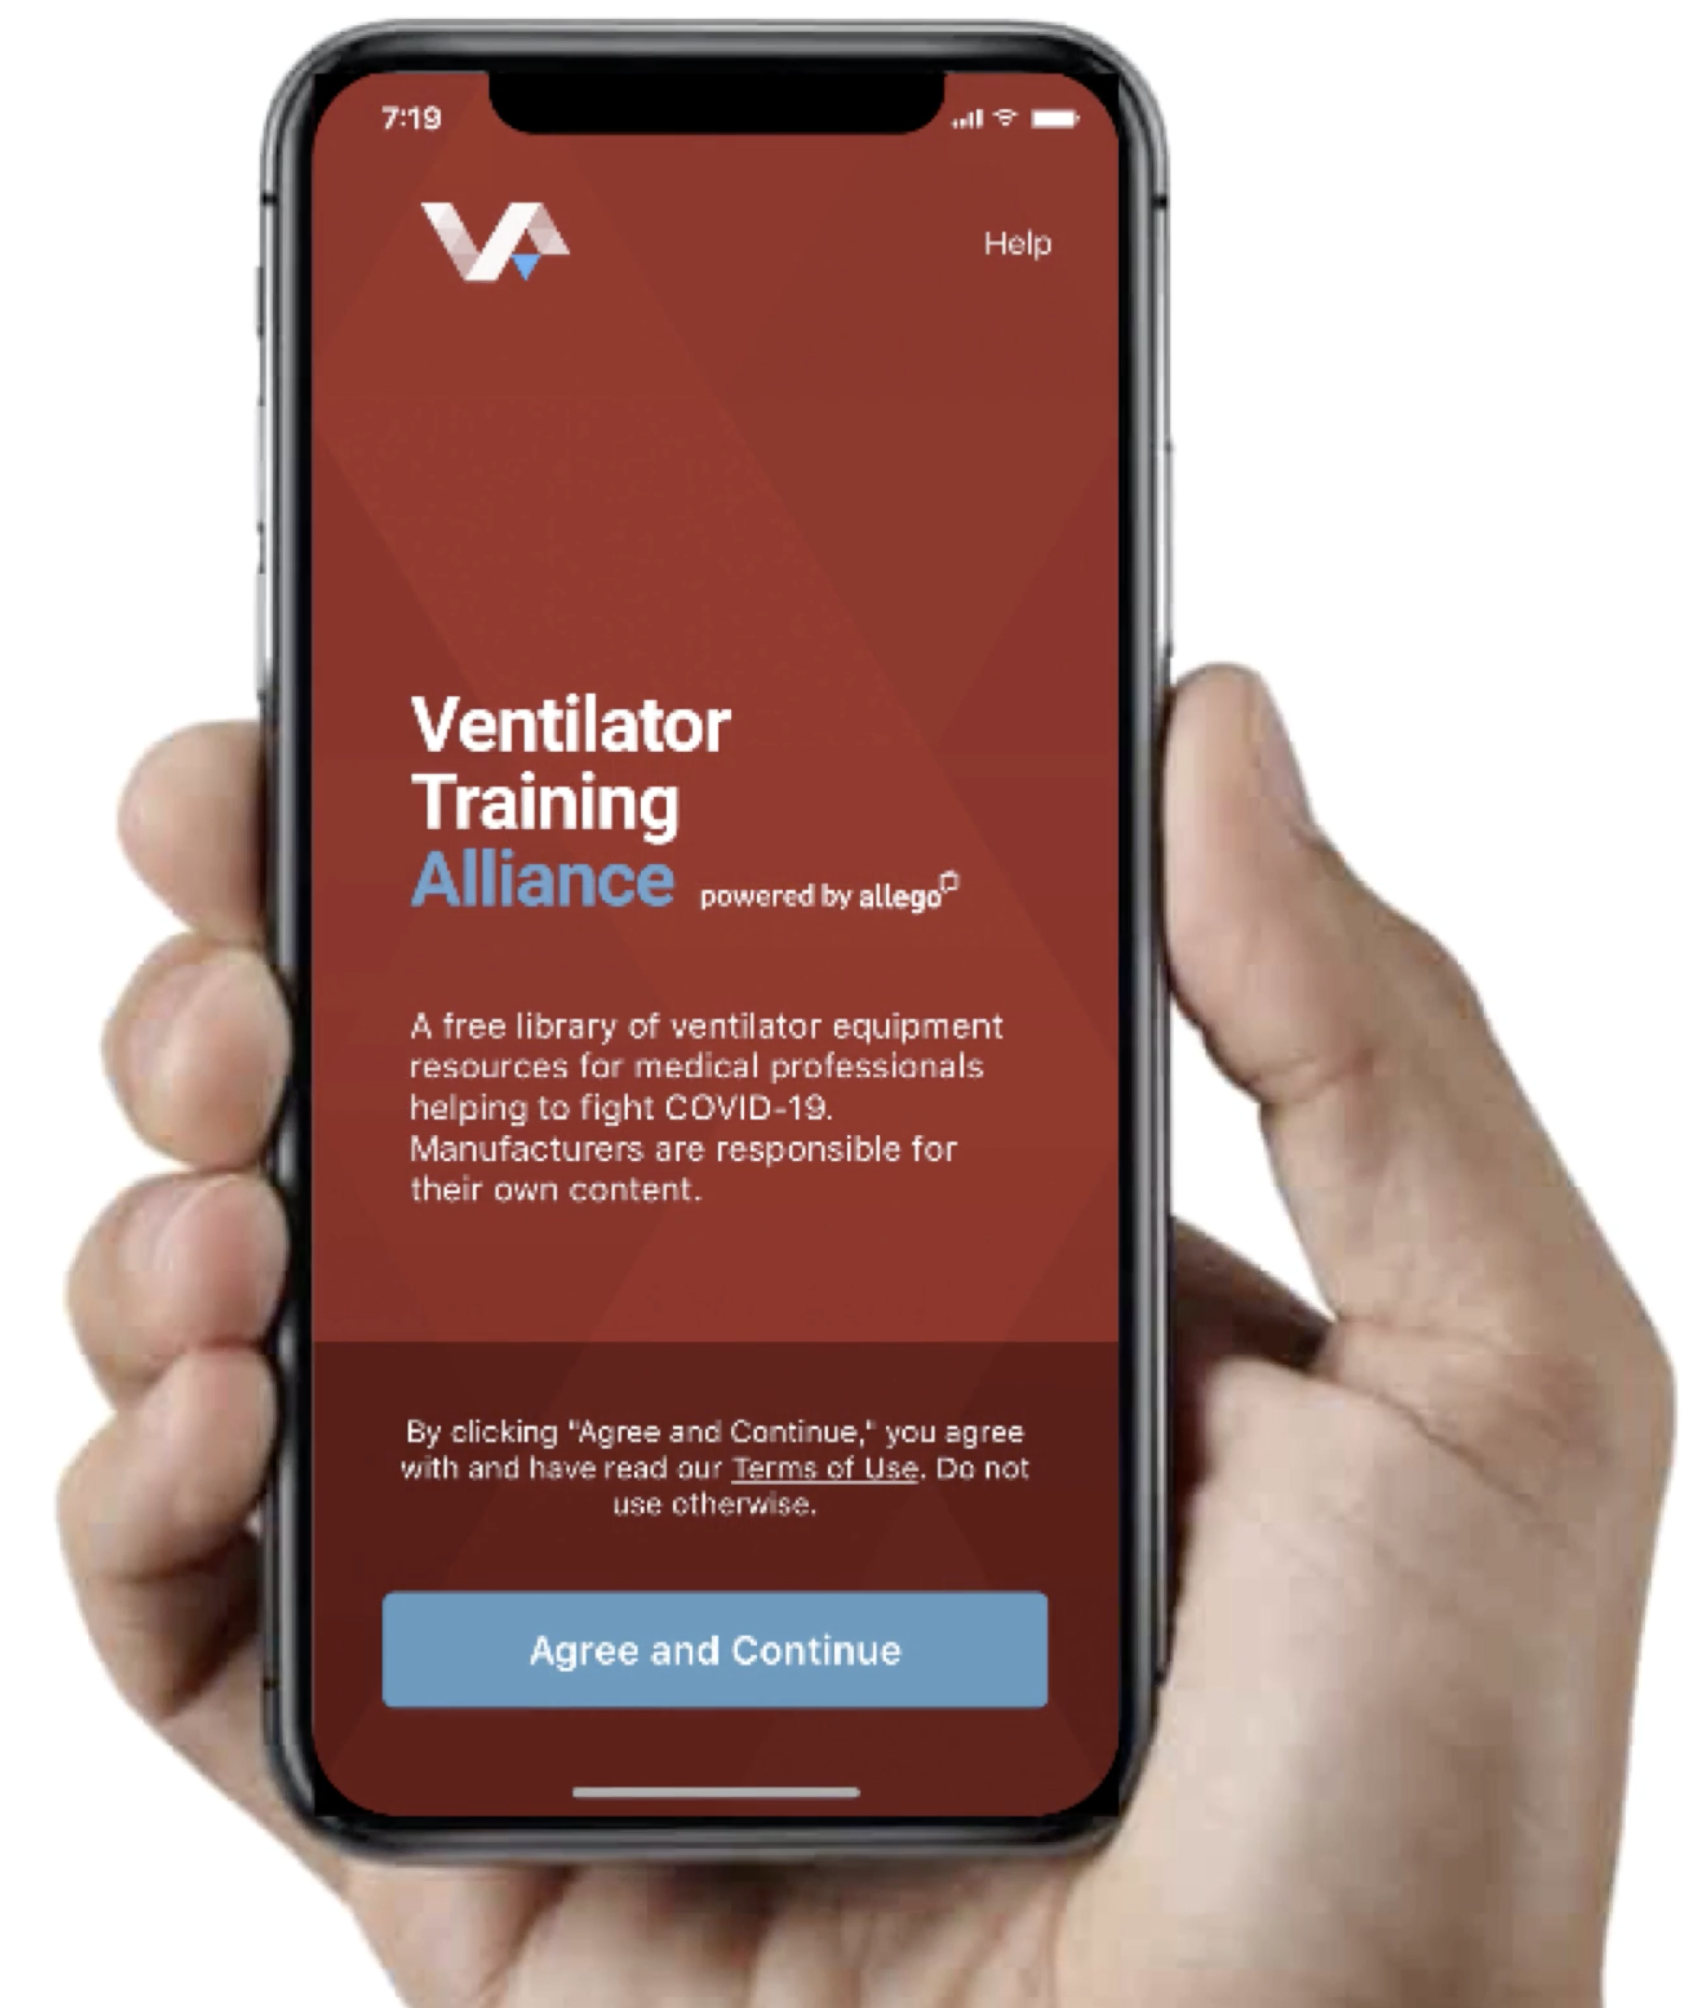 The Ventilator Training Alliance app provides healthcare workers with ventilator training from all major ventilator manufacturers